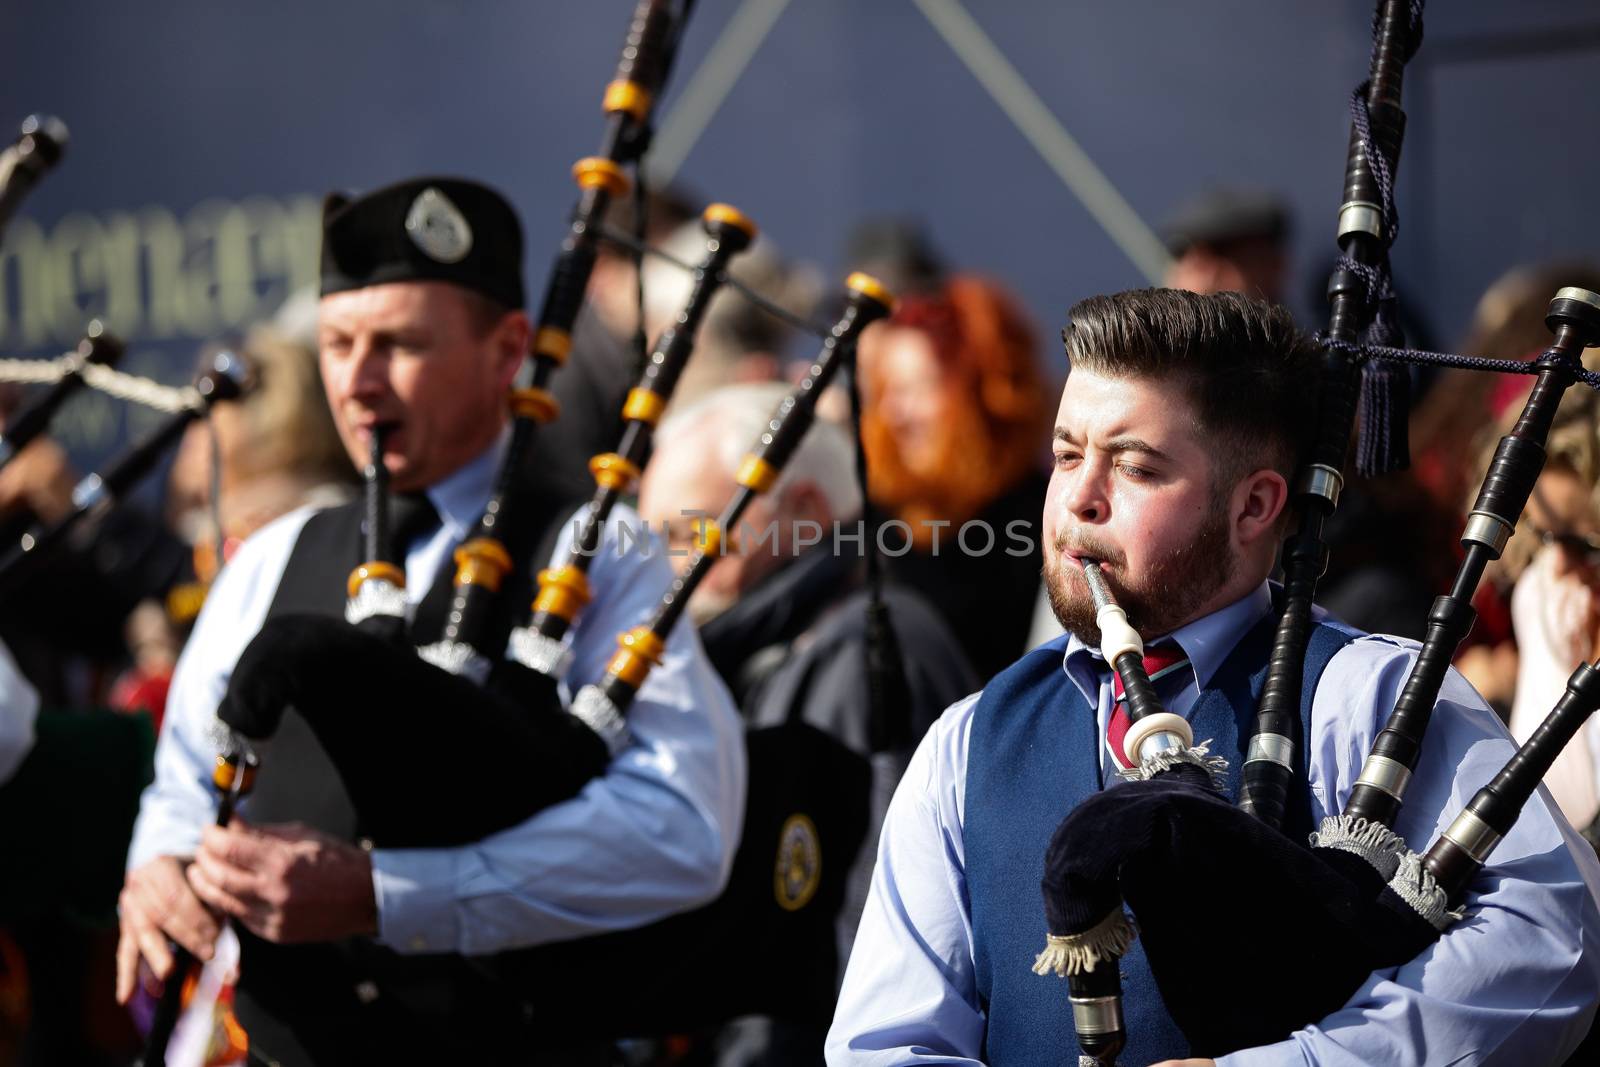 UNITED KINGDOM, London: Bagpipe players are pictured during St Patrick's Day parade near Trafalgar Square in London on March 13, 2016.